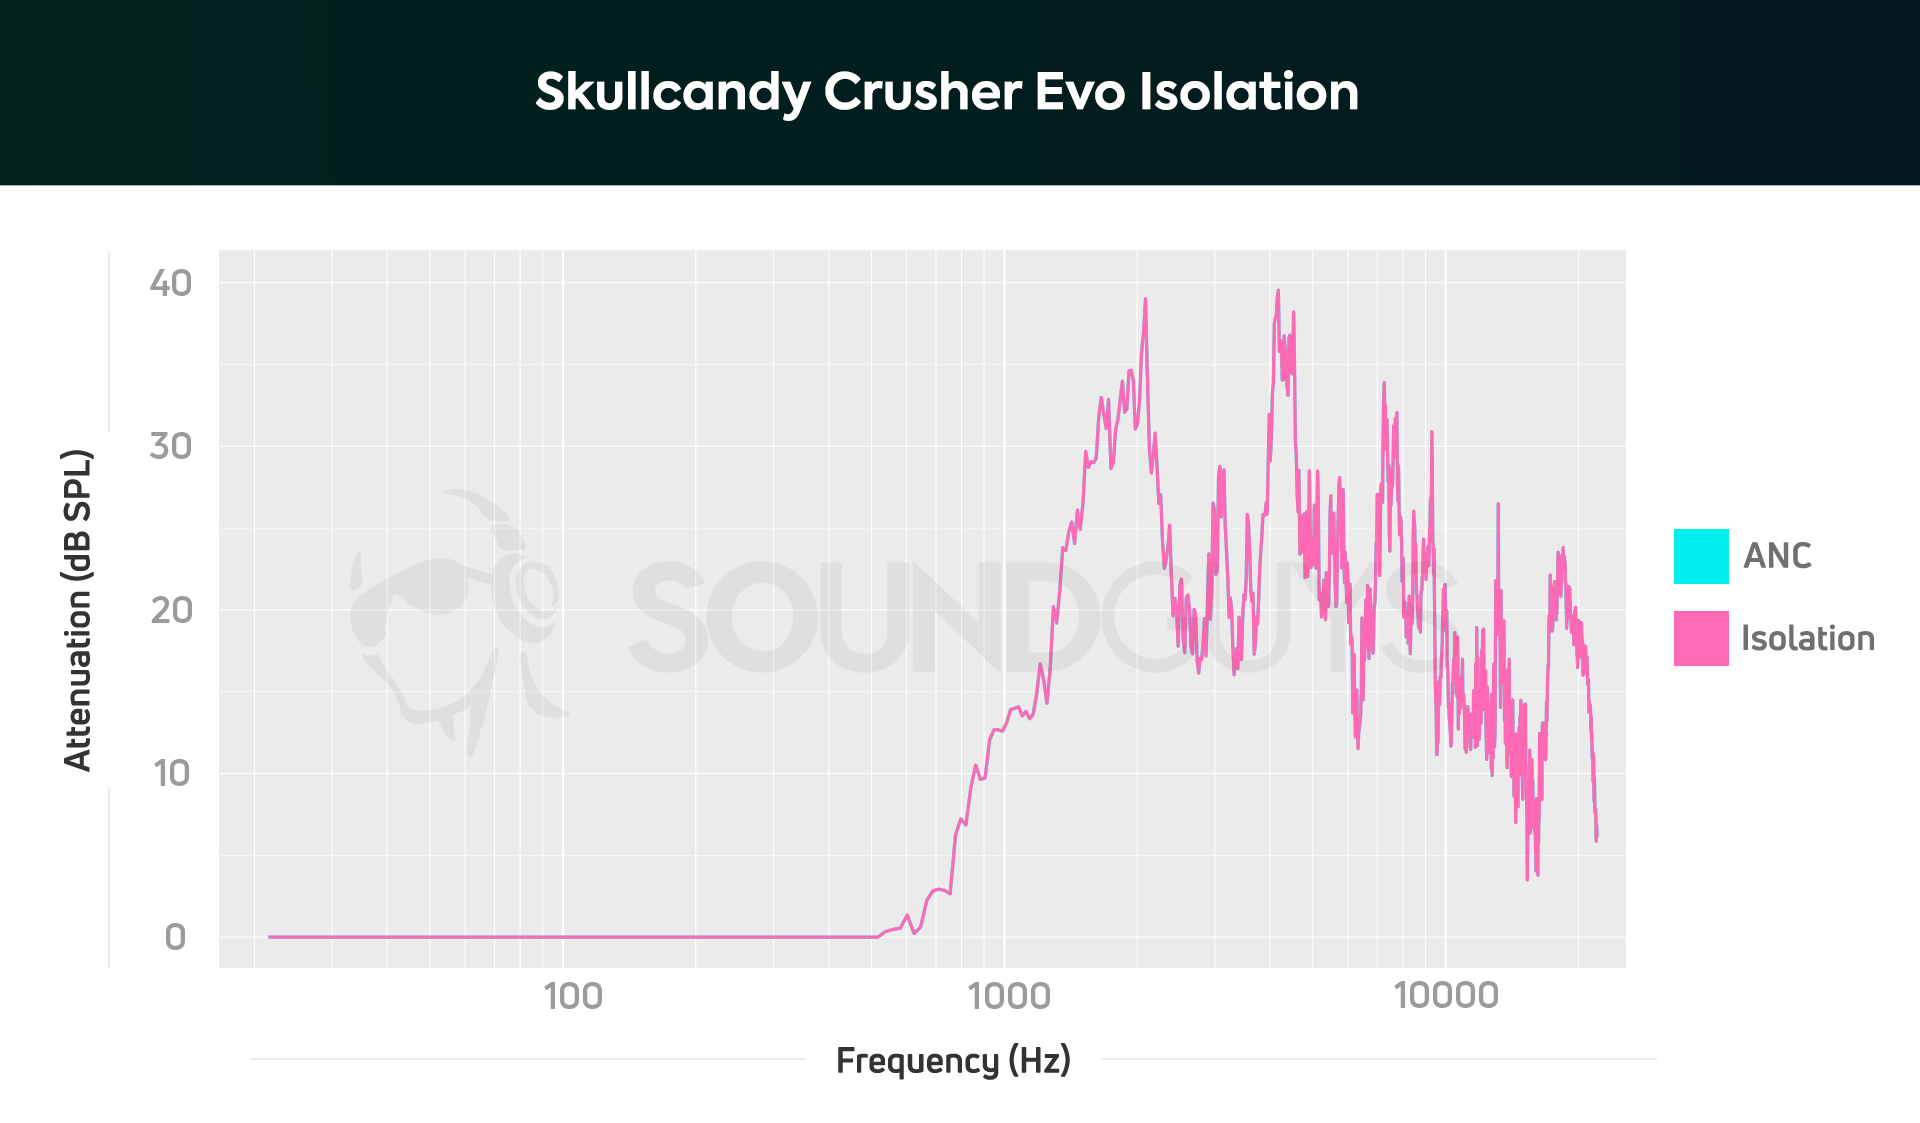 Skullcandy Crusher Evo isolation does good job blocking out higher frequencies